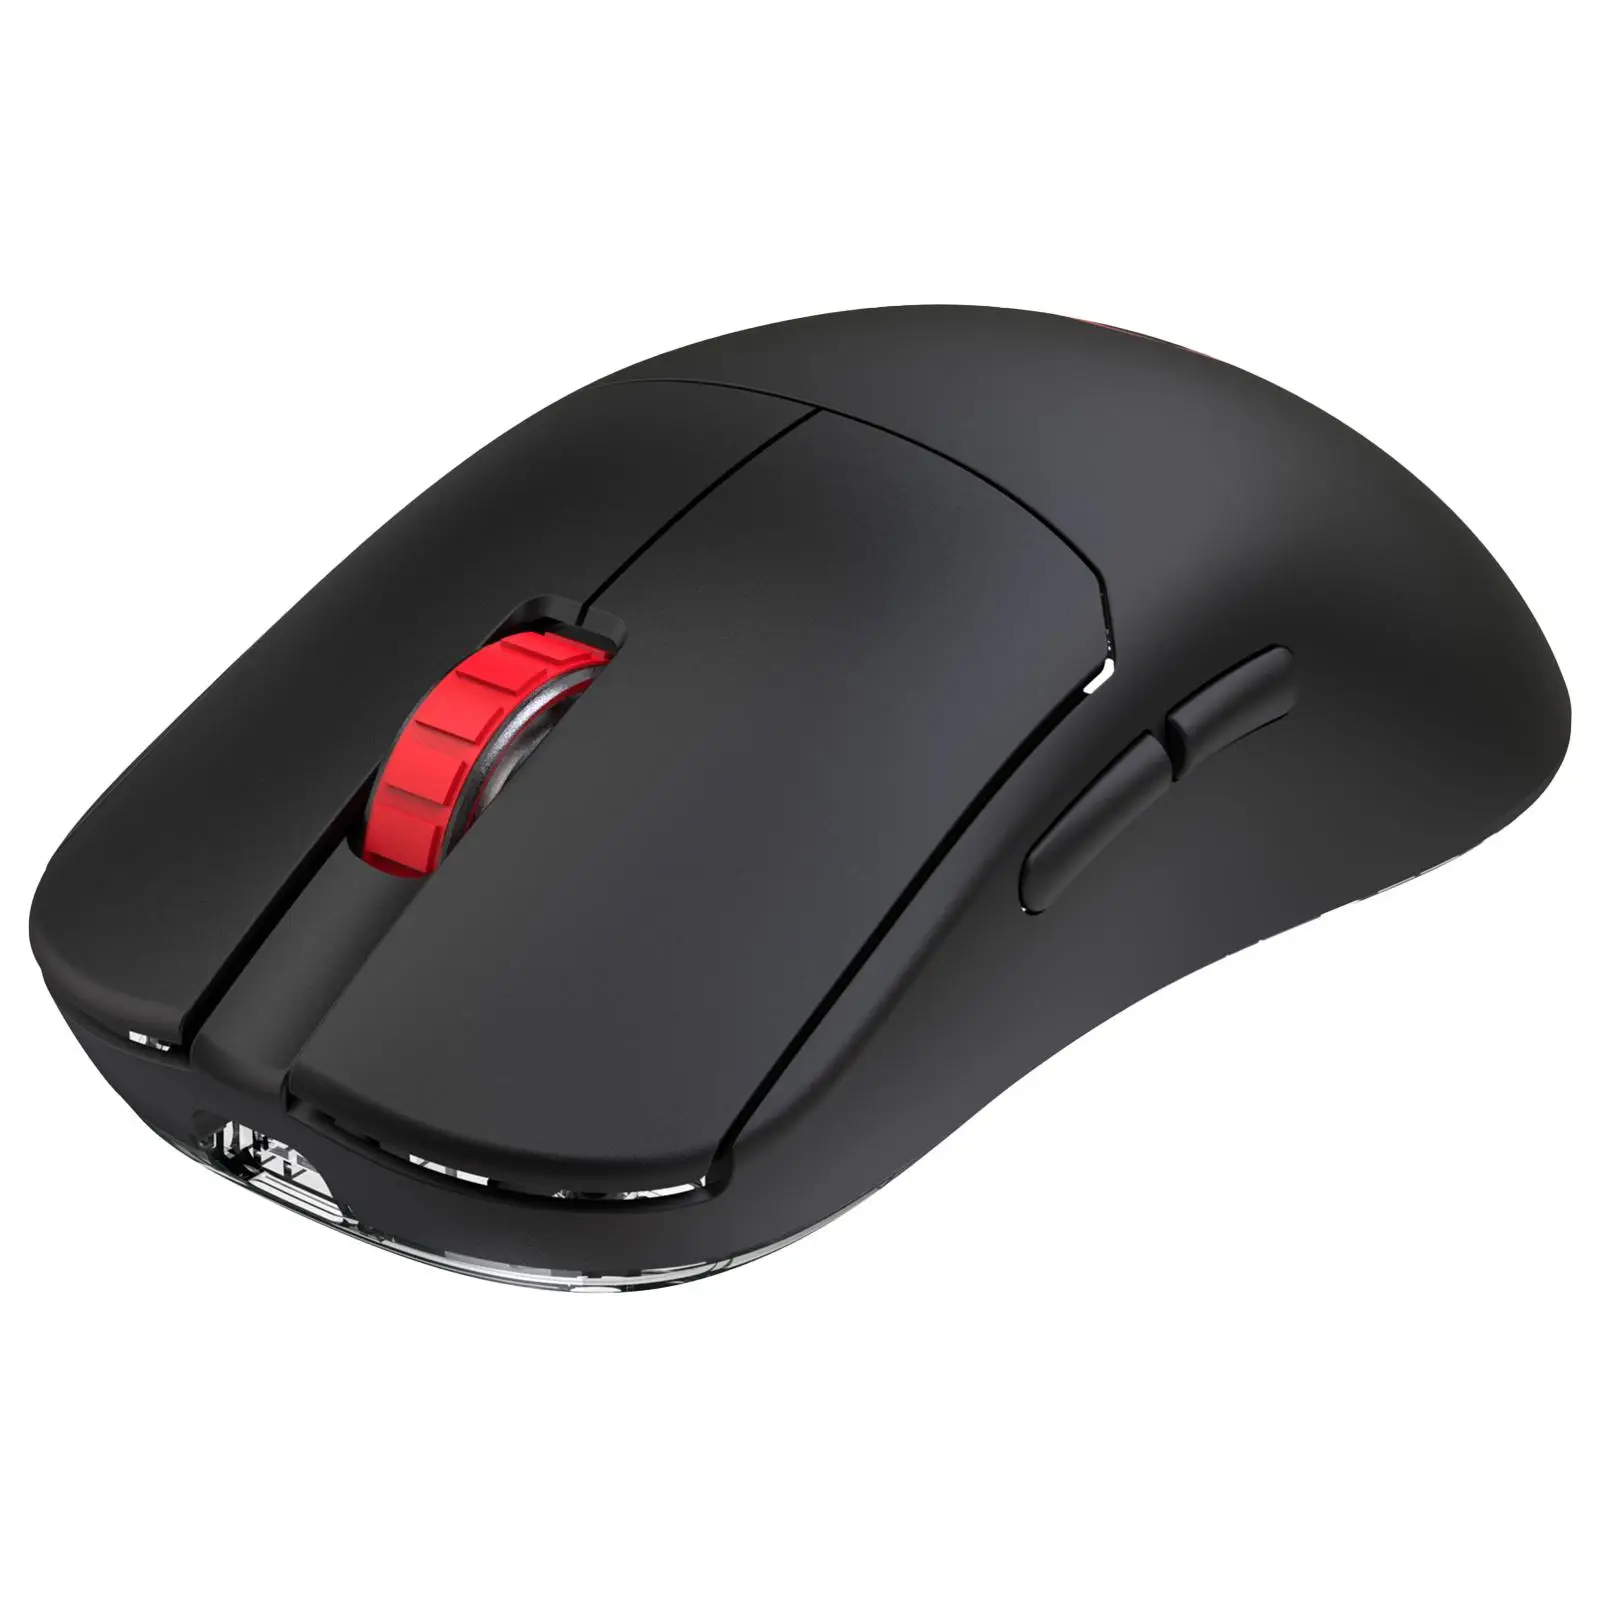 Wired Wireless Gaming Mouse Adjustable 10000 DPI Ergonomic Mice for Computer